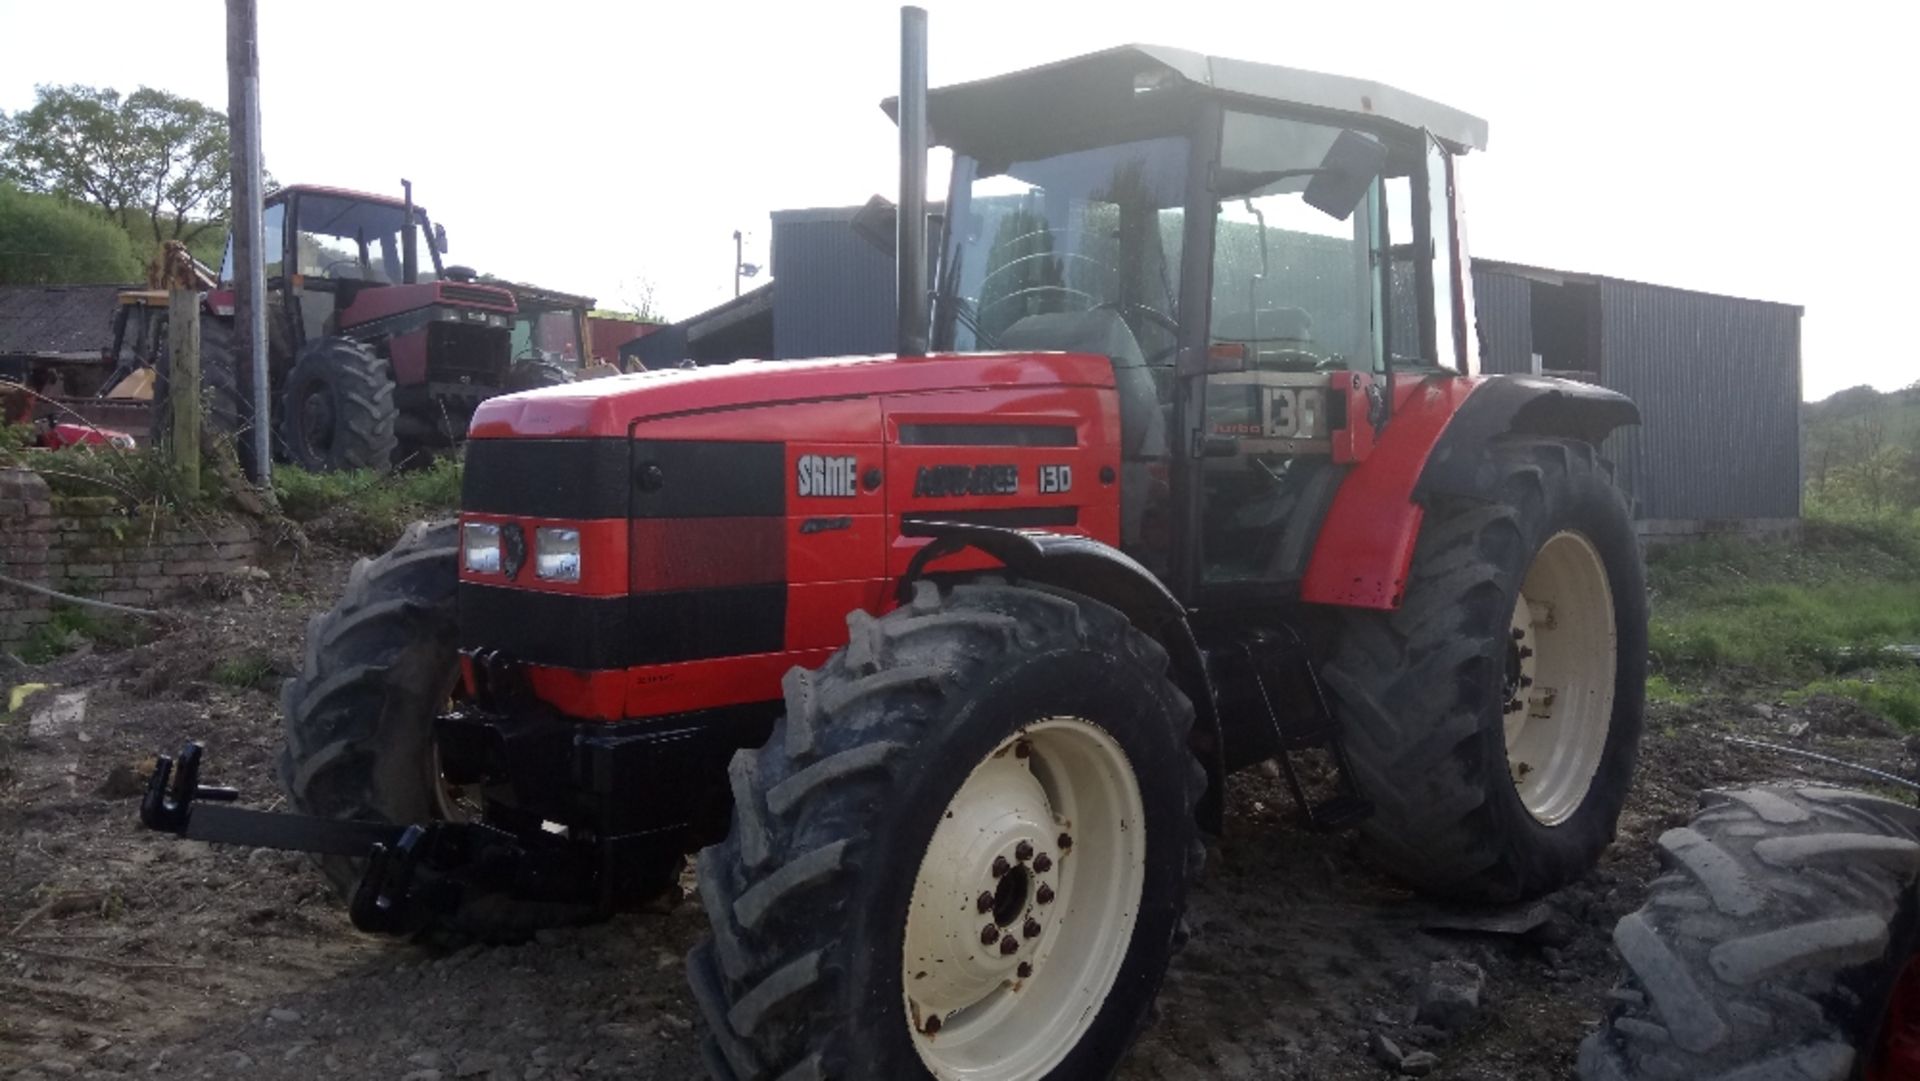 1995 Same 130 Turbo Tractor c/w front fenders, pto, front lift arms